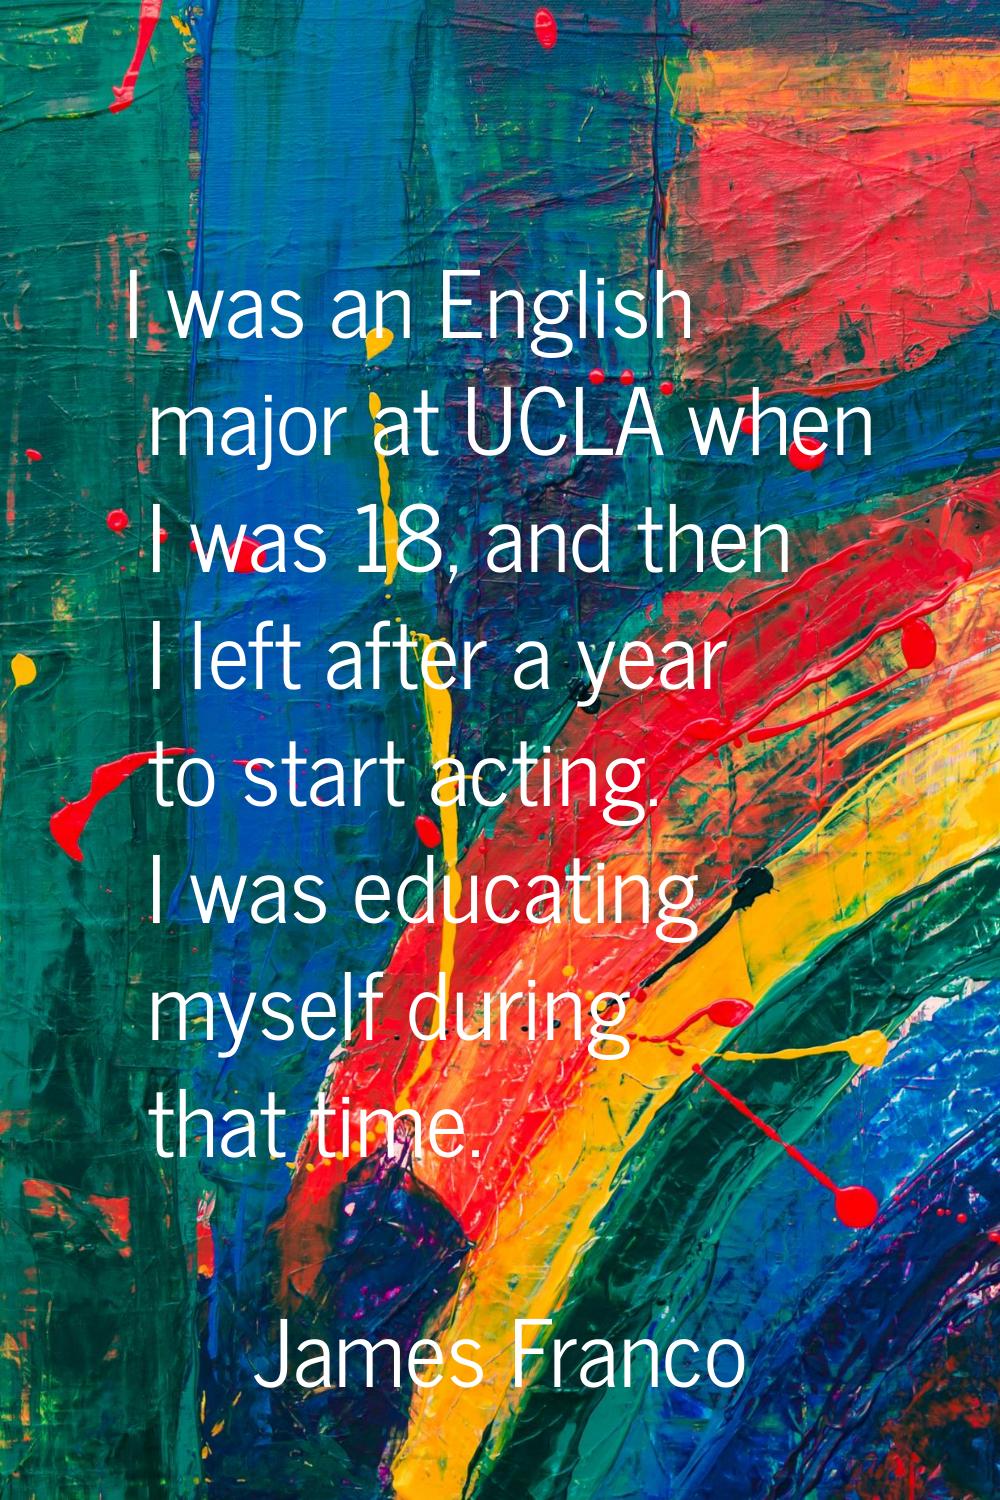 I was an English major at UCLA when I was 18, and then I left after a year to start acting. I was e